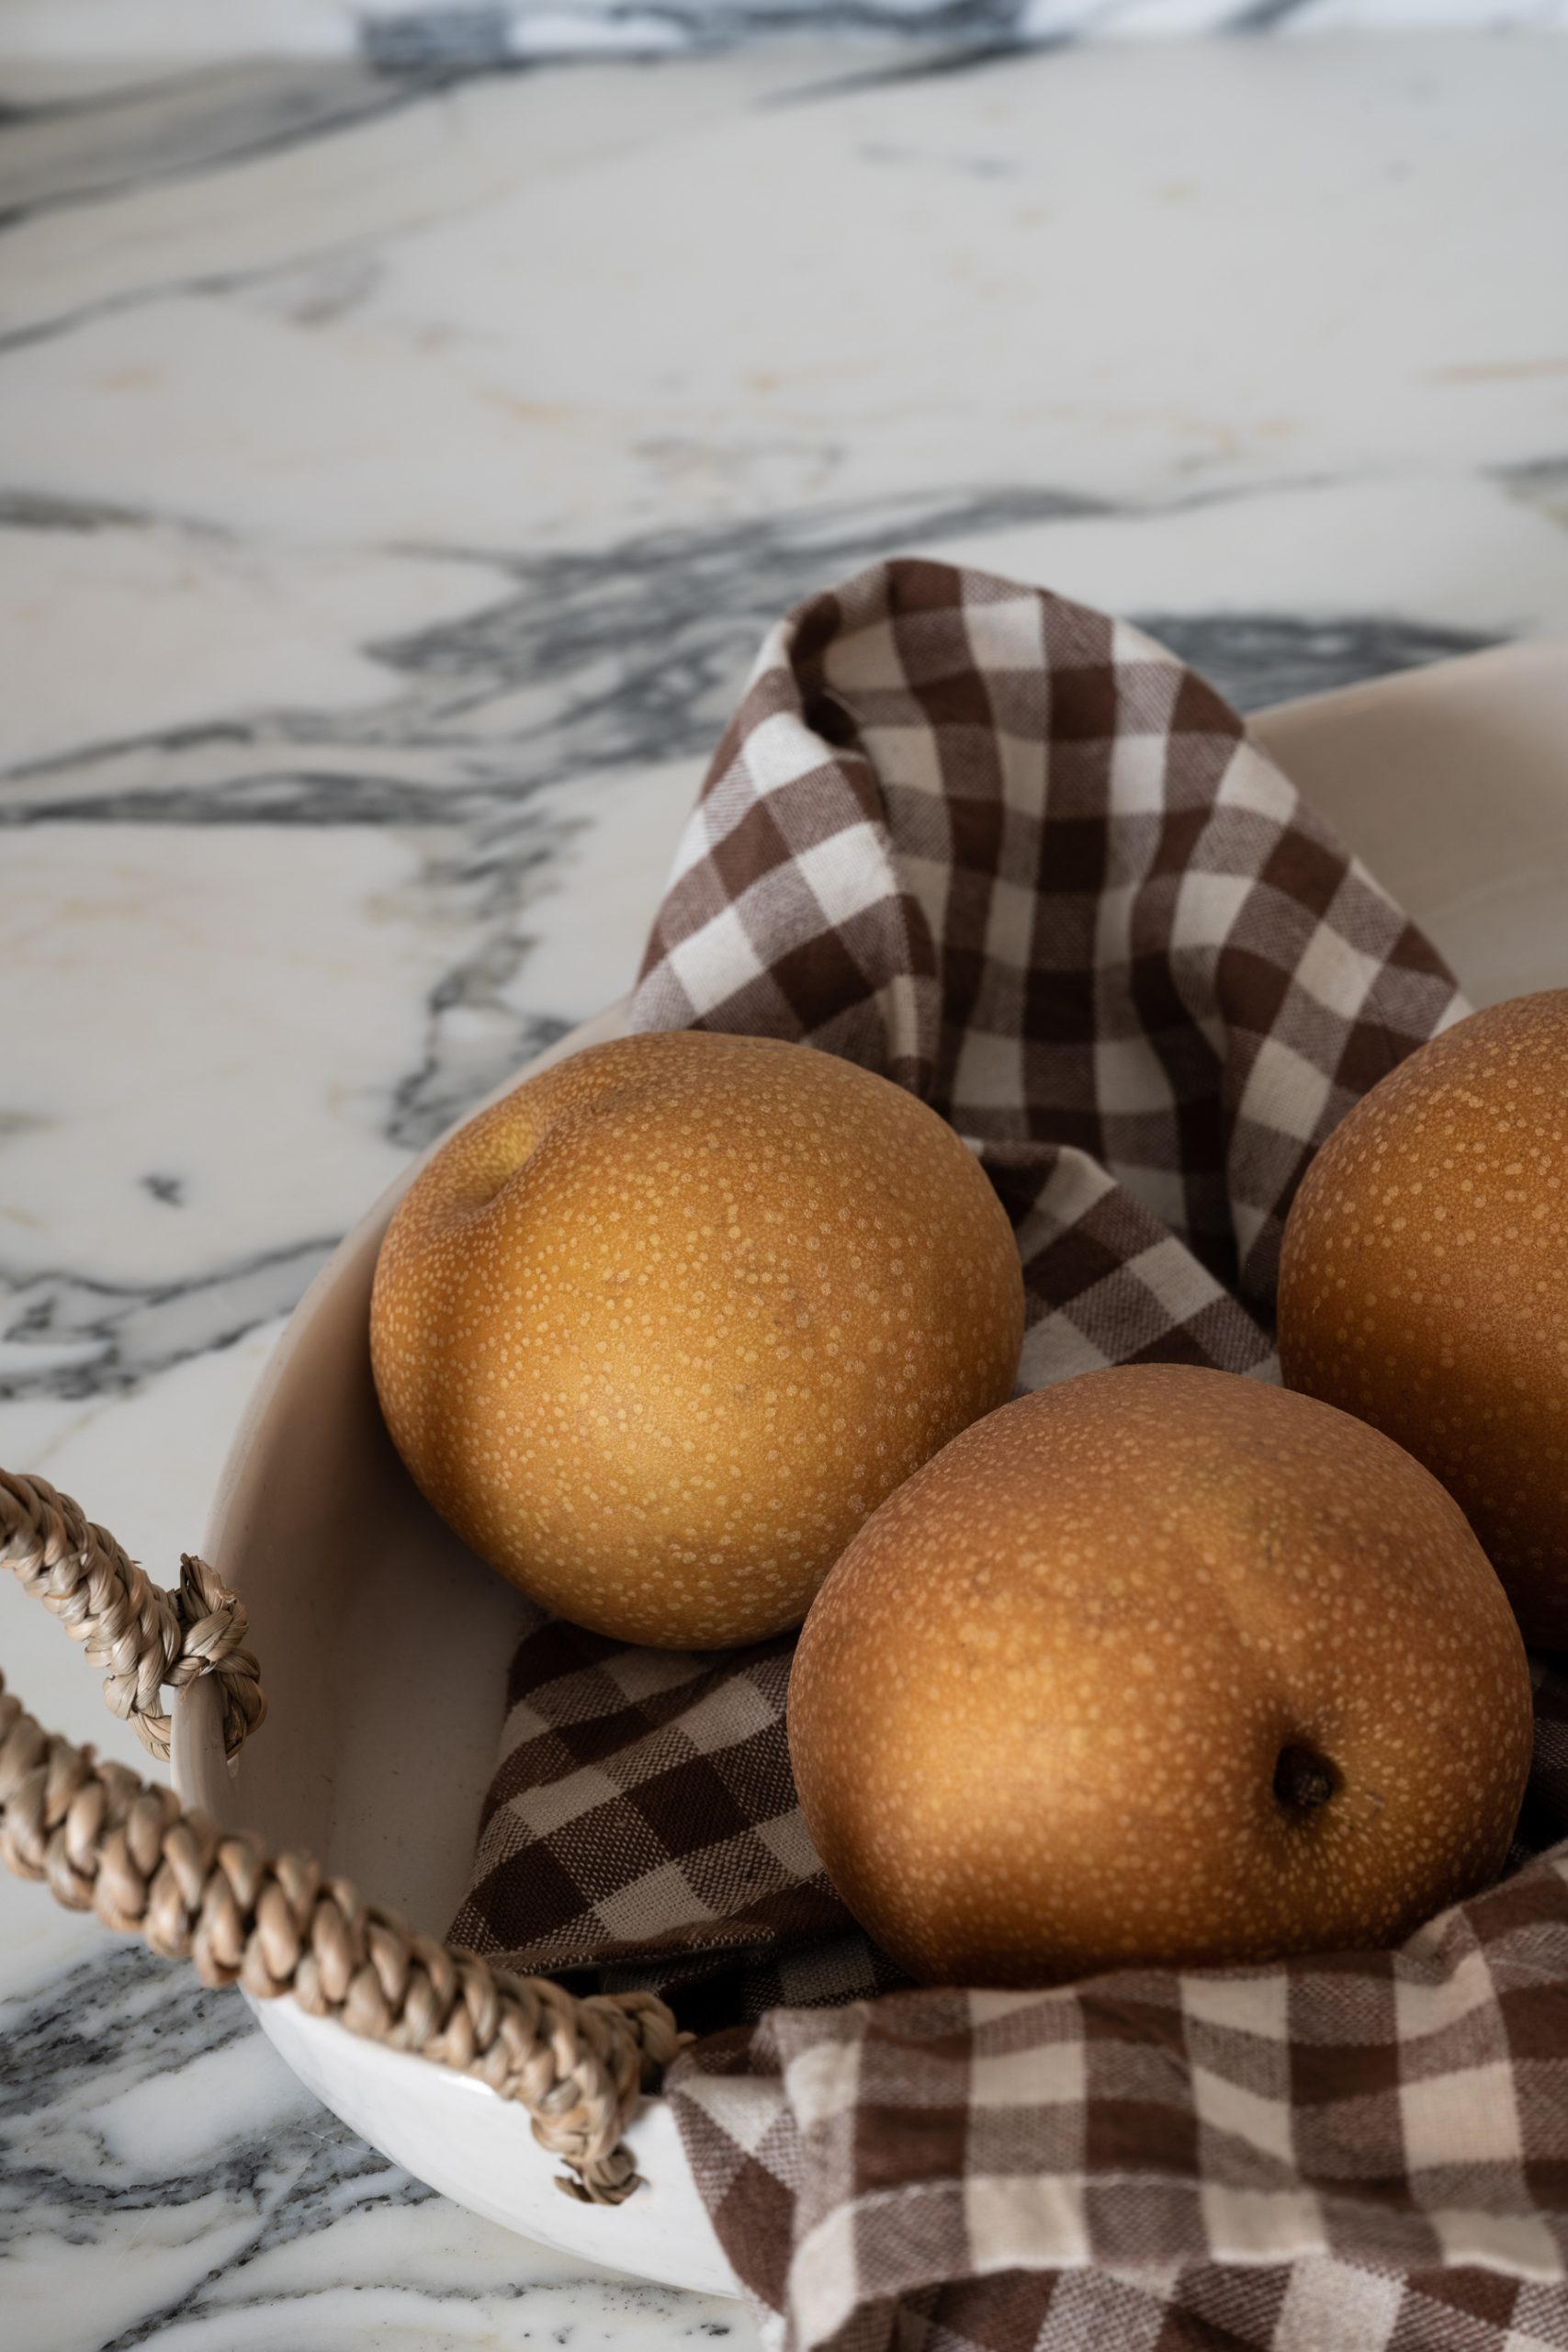 asian pears in tray on marble countertop